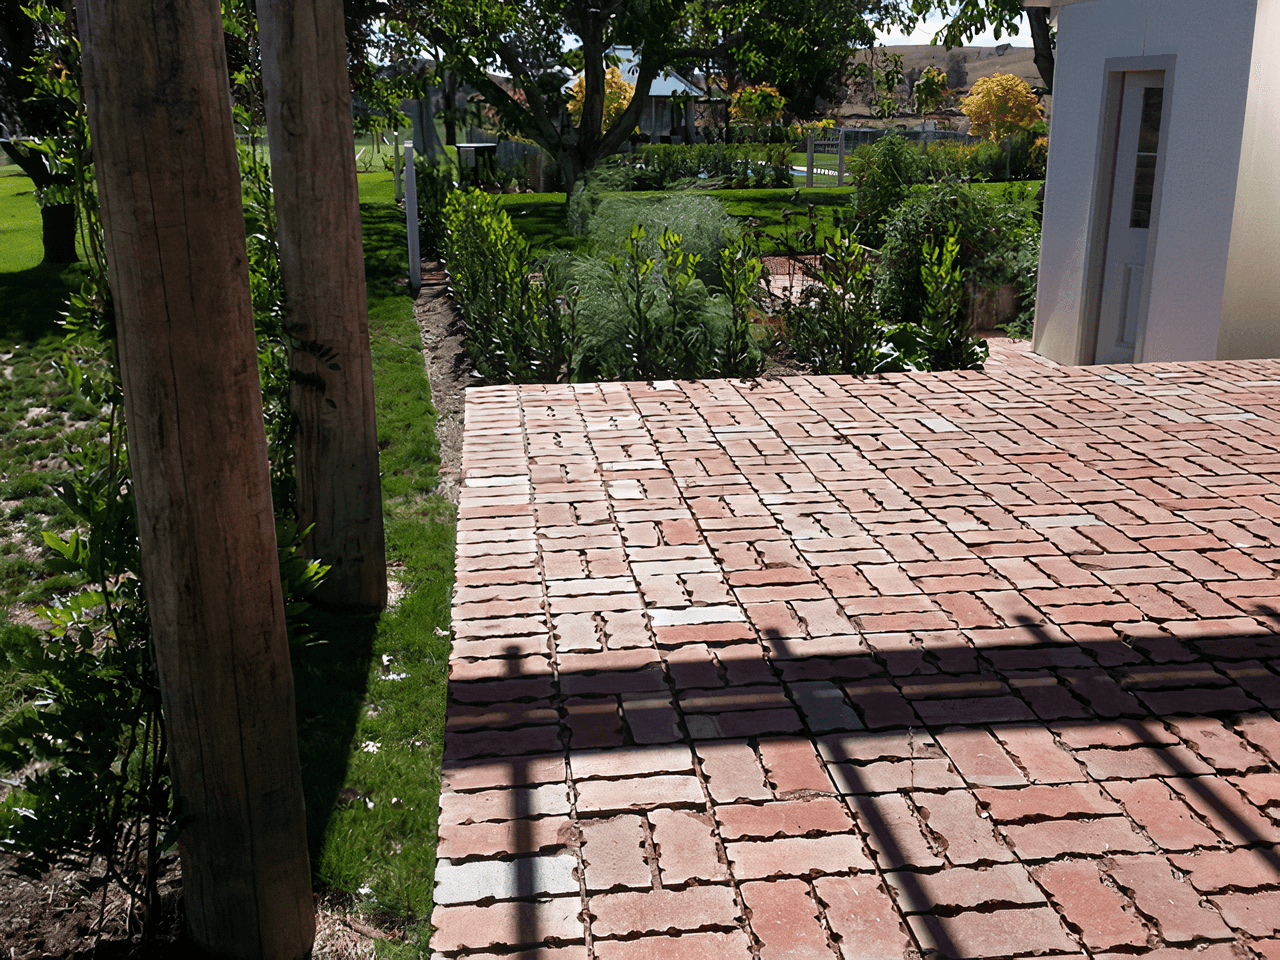 Outdoor patio with brick paving